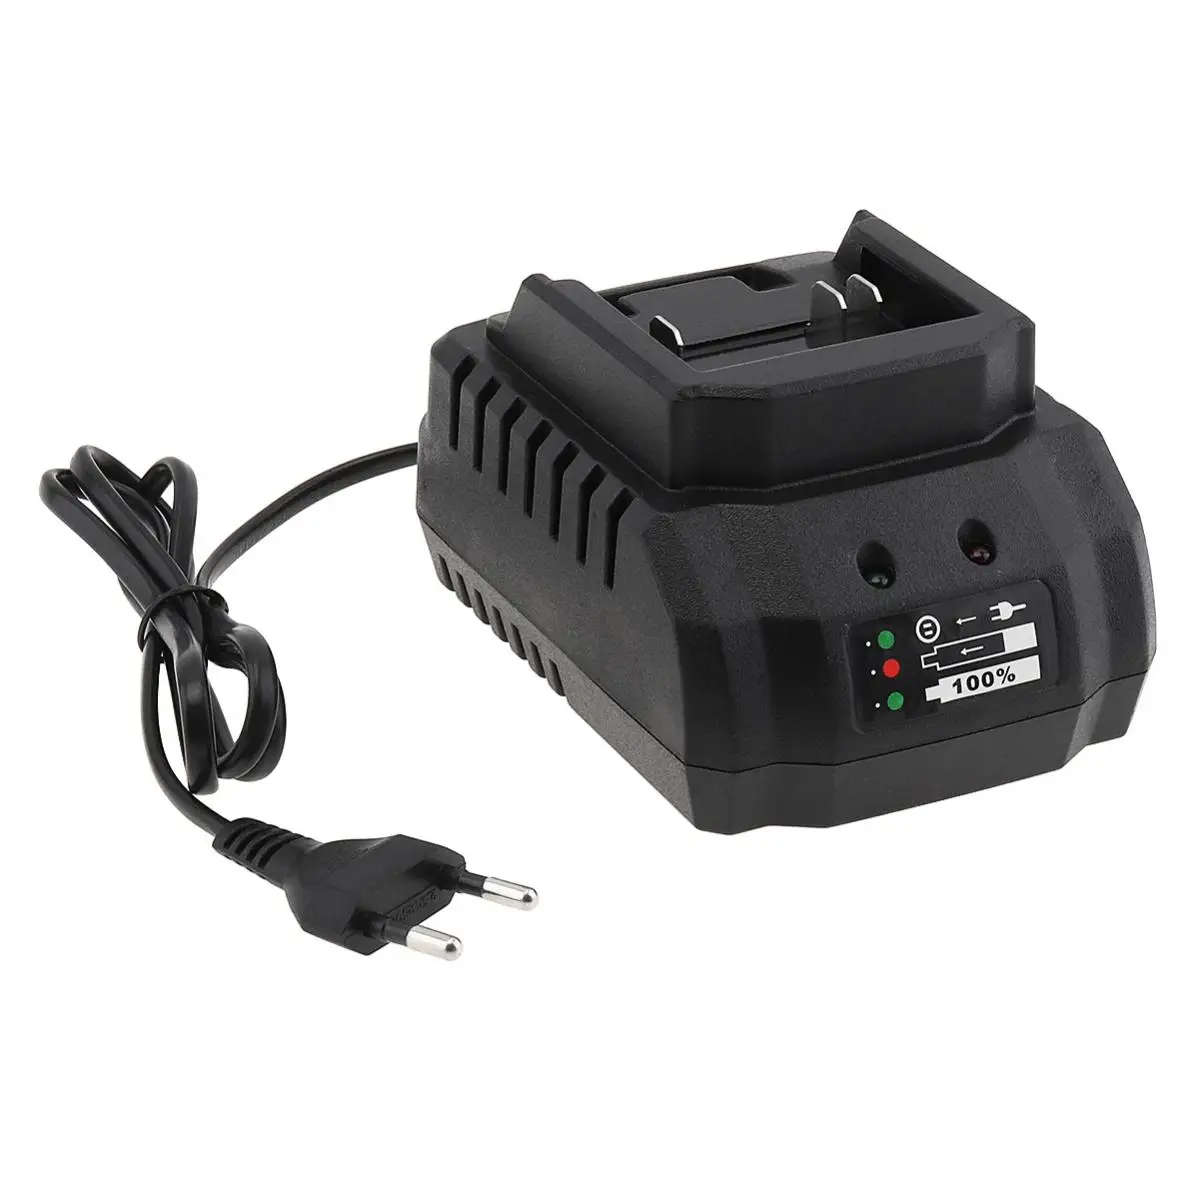 18V 21V 2A Lithium Battery Charger Portable High Power Smart Fast Charger for Electric Screwdriver Drill Power Tool Accessories enlarge